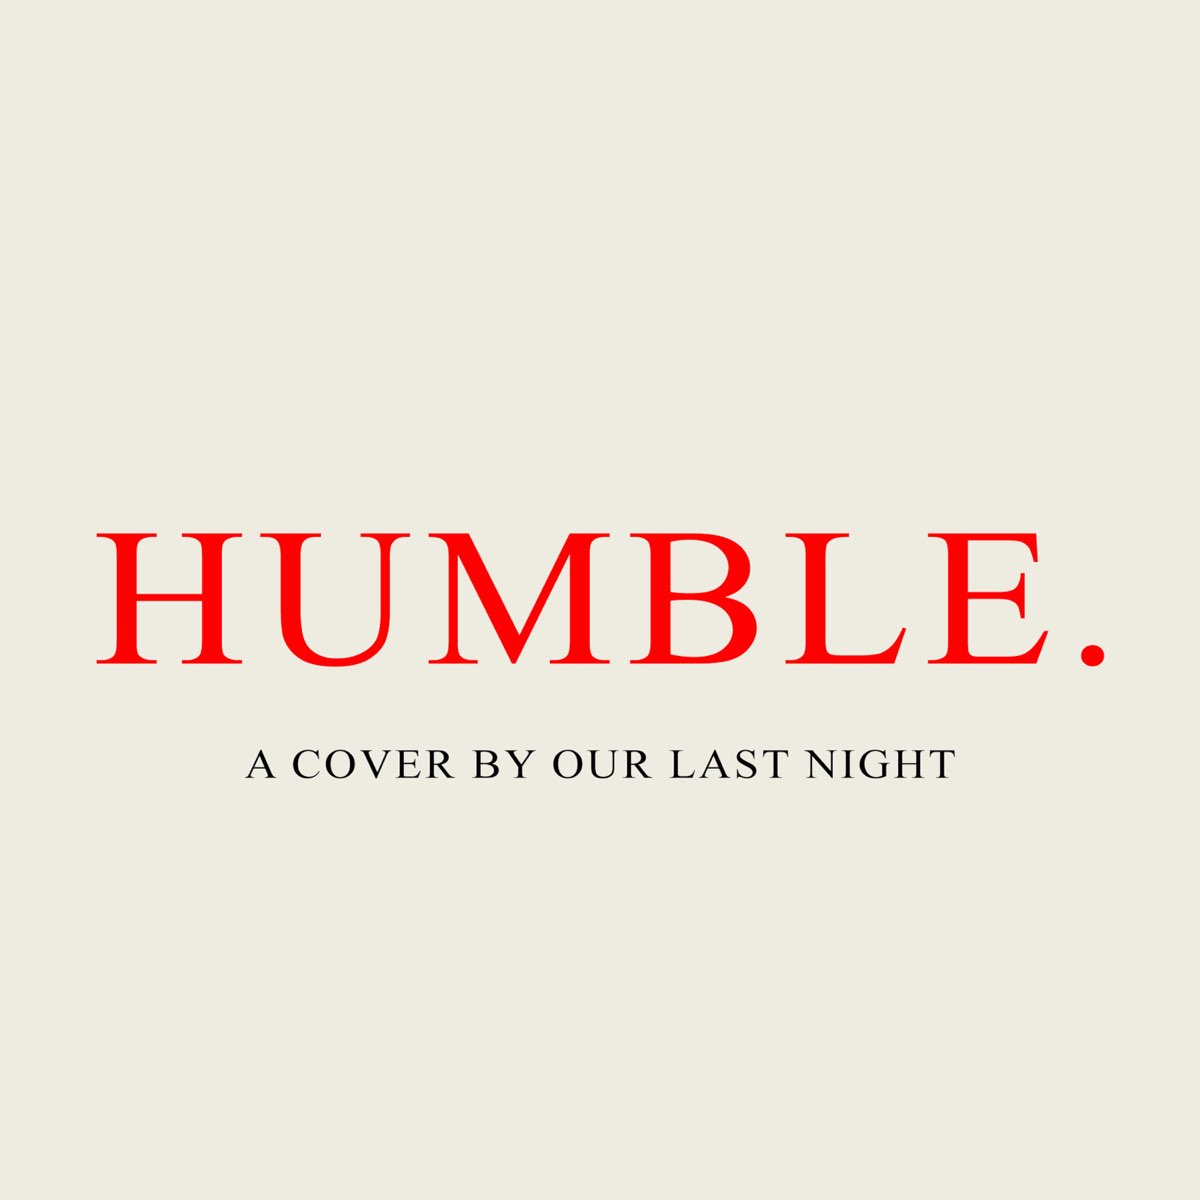 When the party last night. Our last Night обложка. Humble обложка. Обложка песни Humble. Kendrick Lamar Humble Cover.